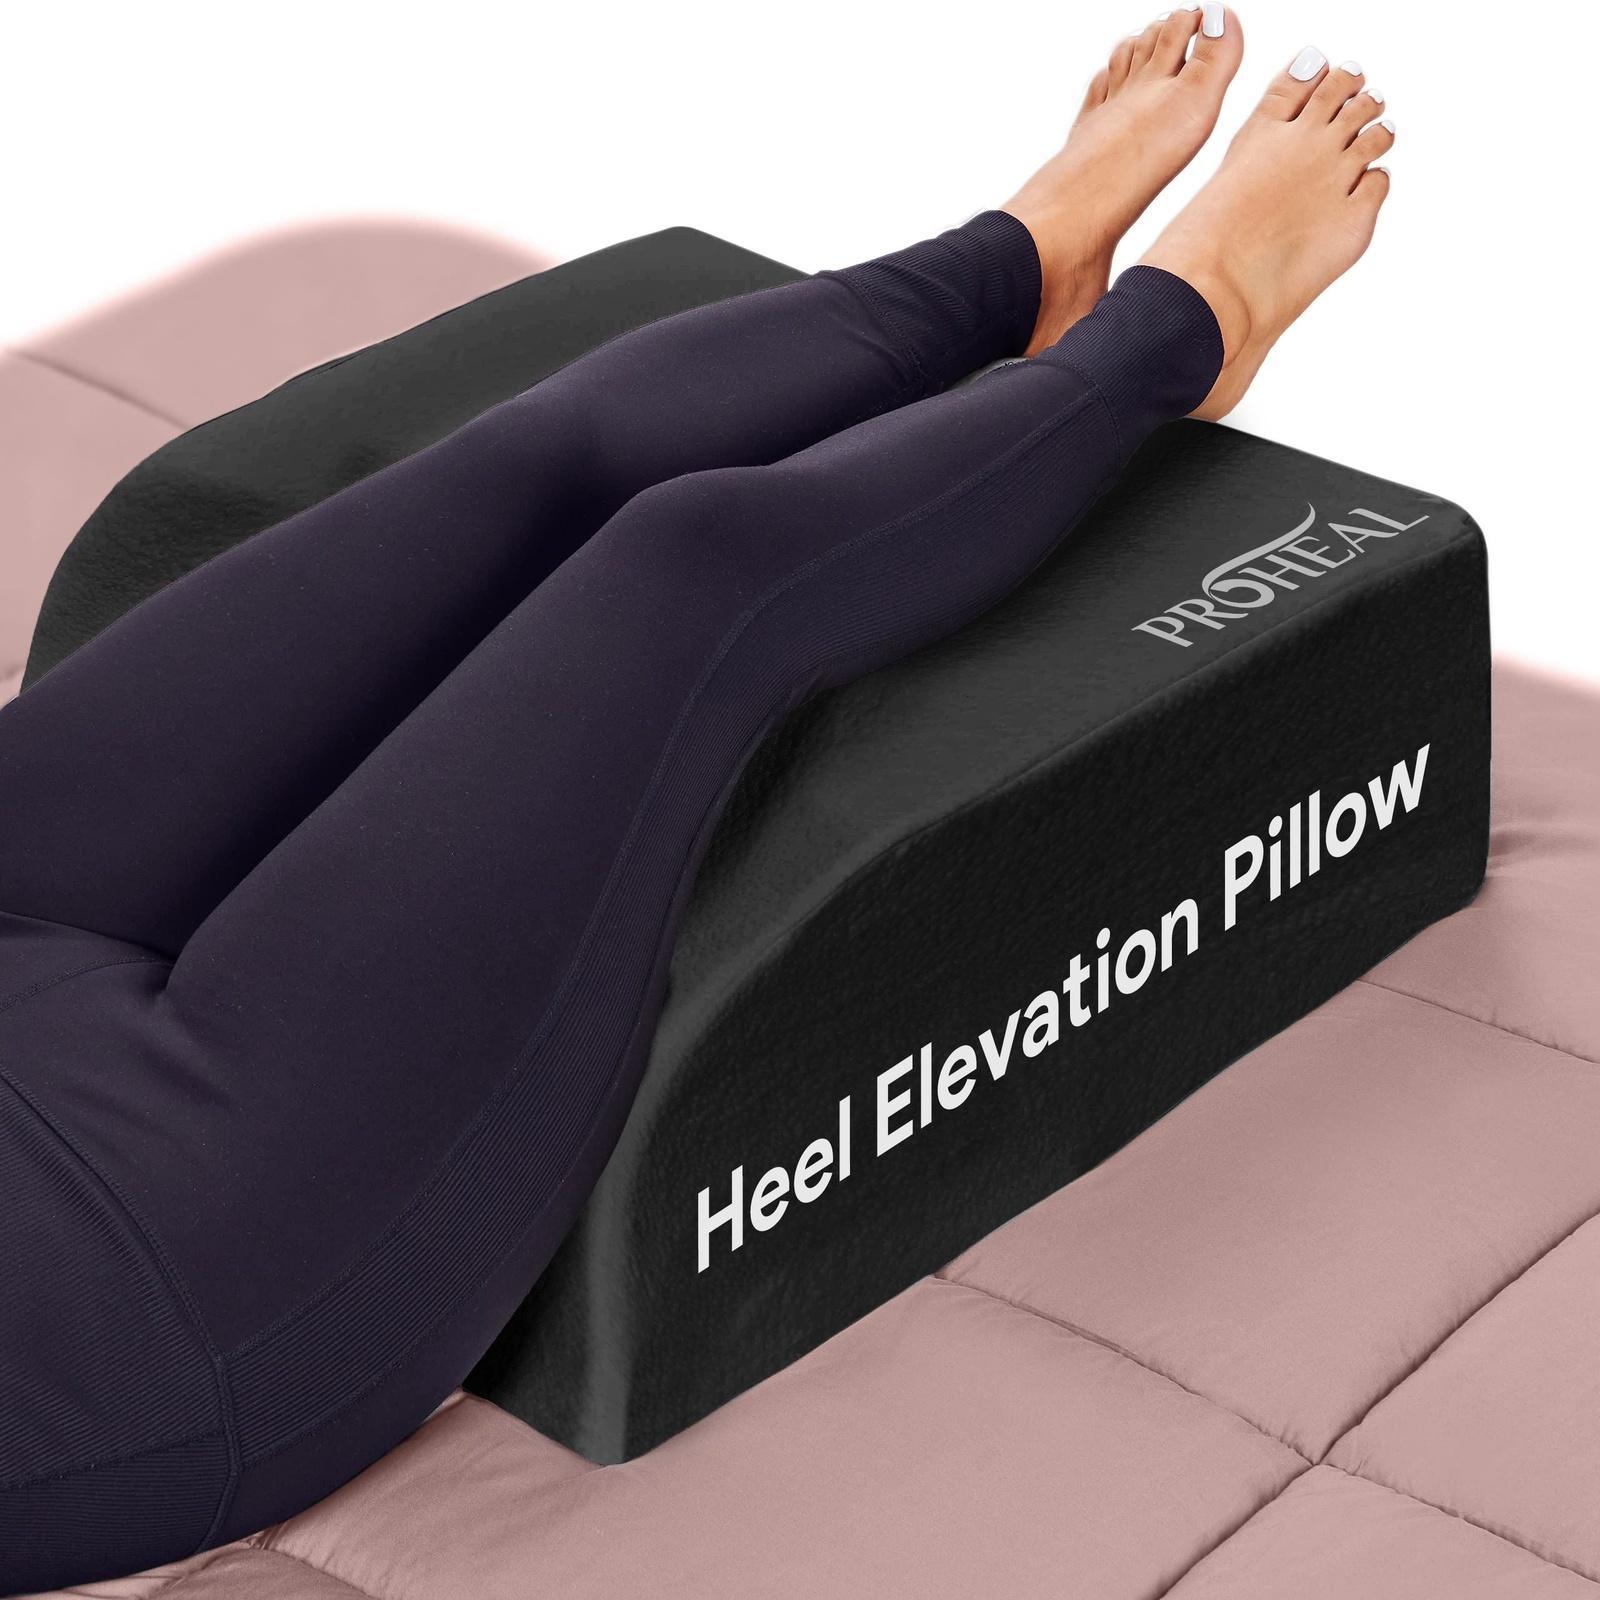 Bedsore Pillow / Pressure Sore Pillow – Easy To Make